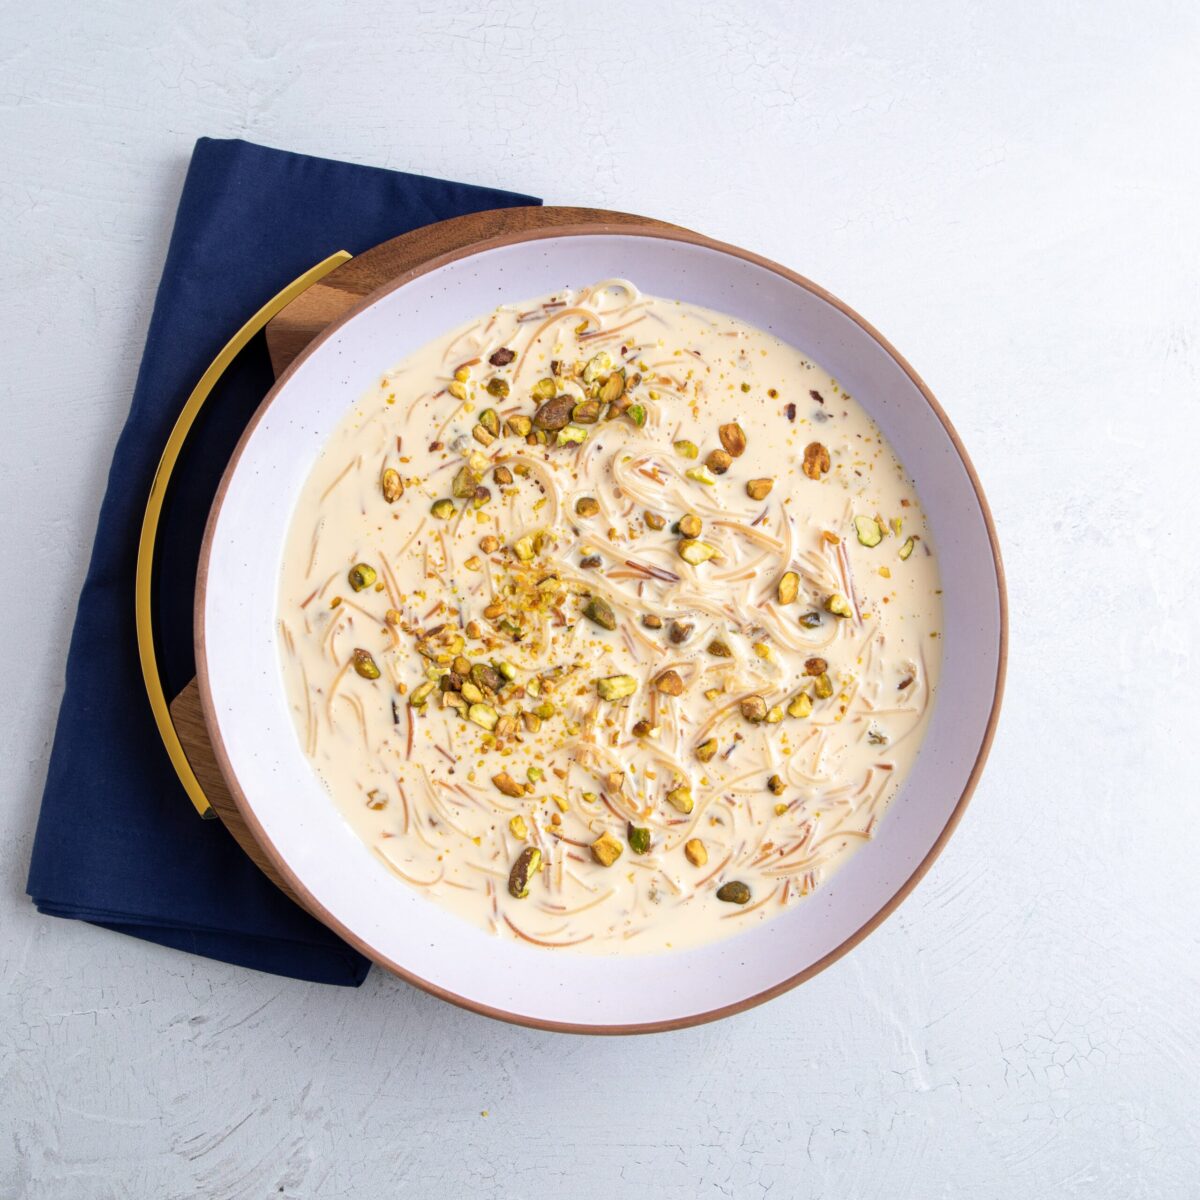 vermicelli noodles in a creamy base in a white bowl with brown border, resting on a round wooden board with a gold border. Everything is resting on a blue napkin folded into a rectangle.